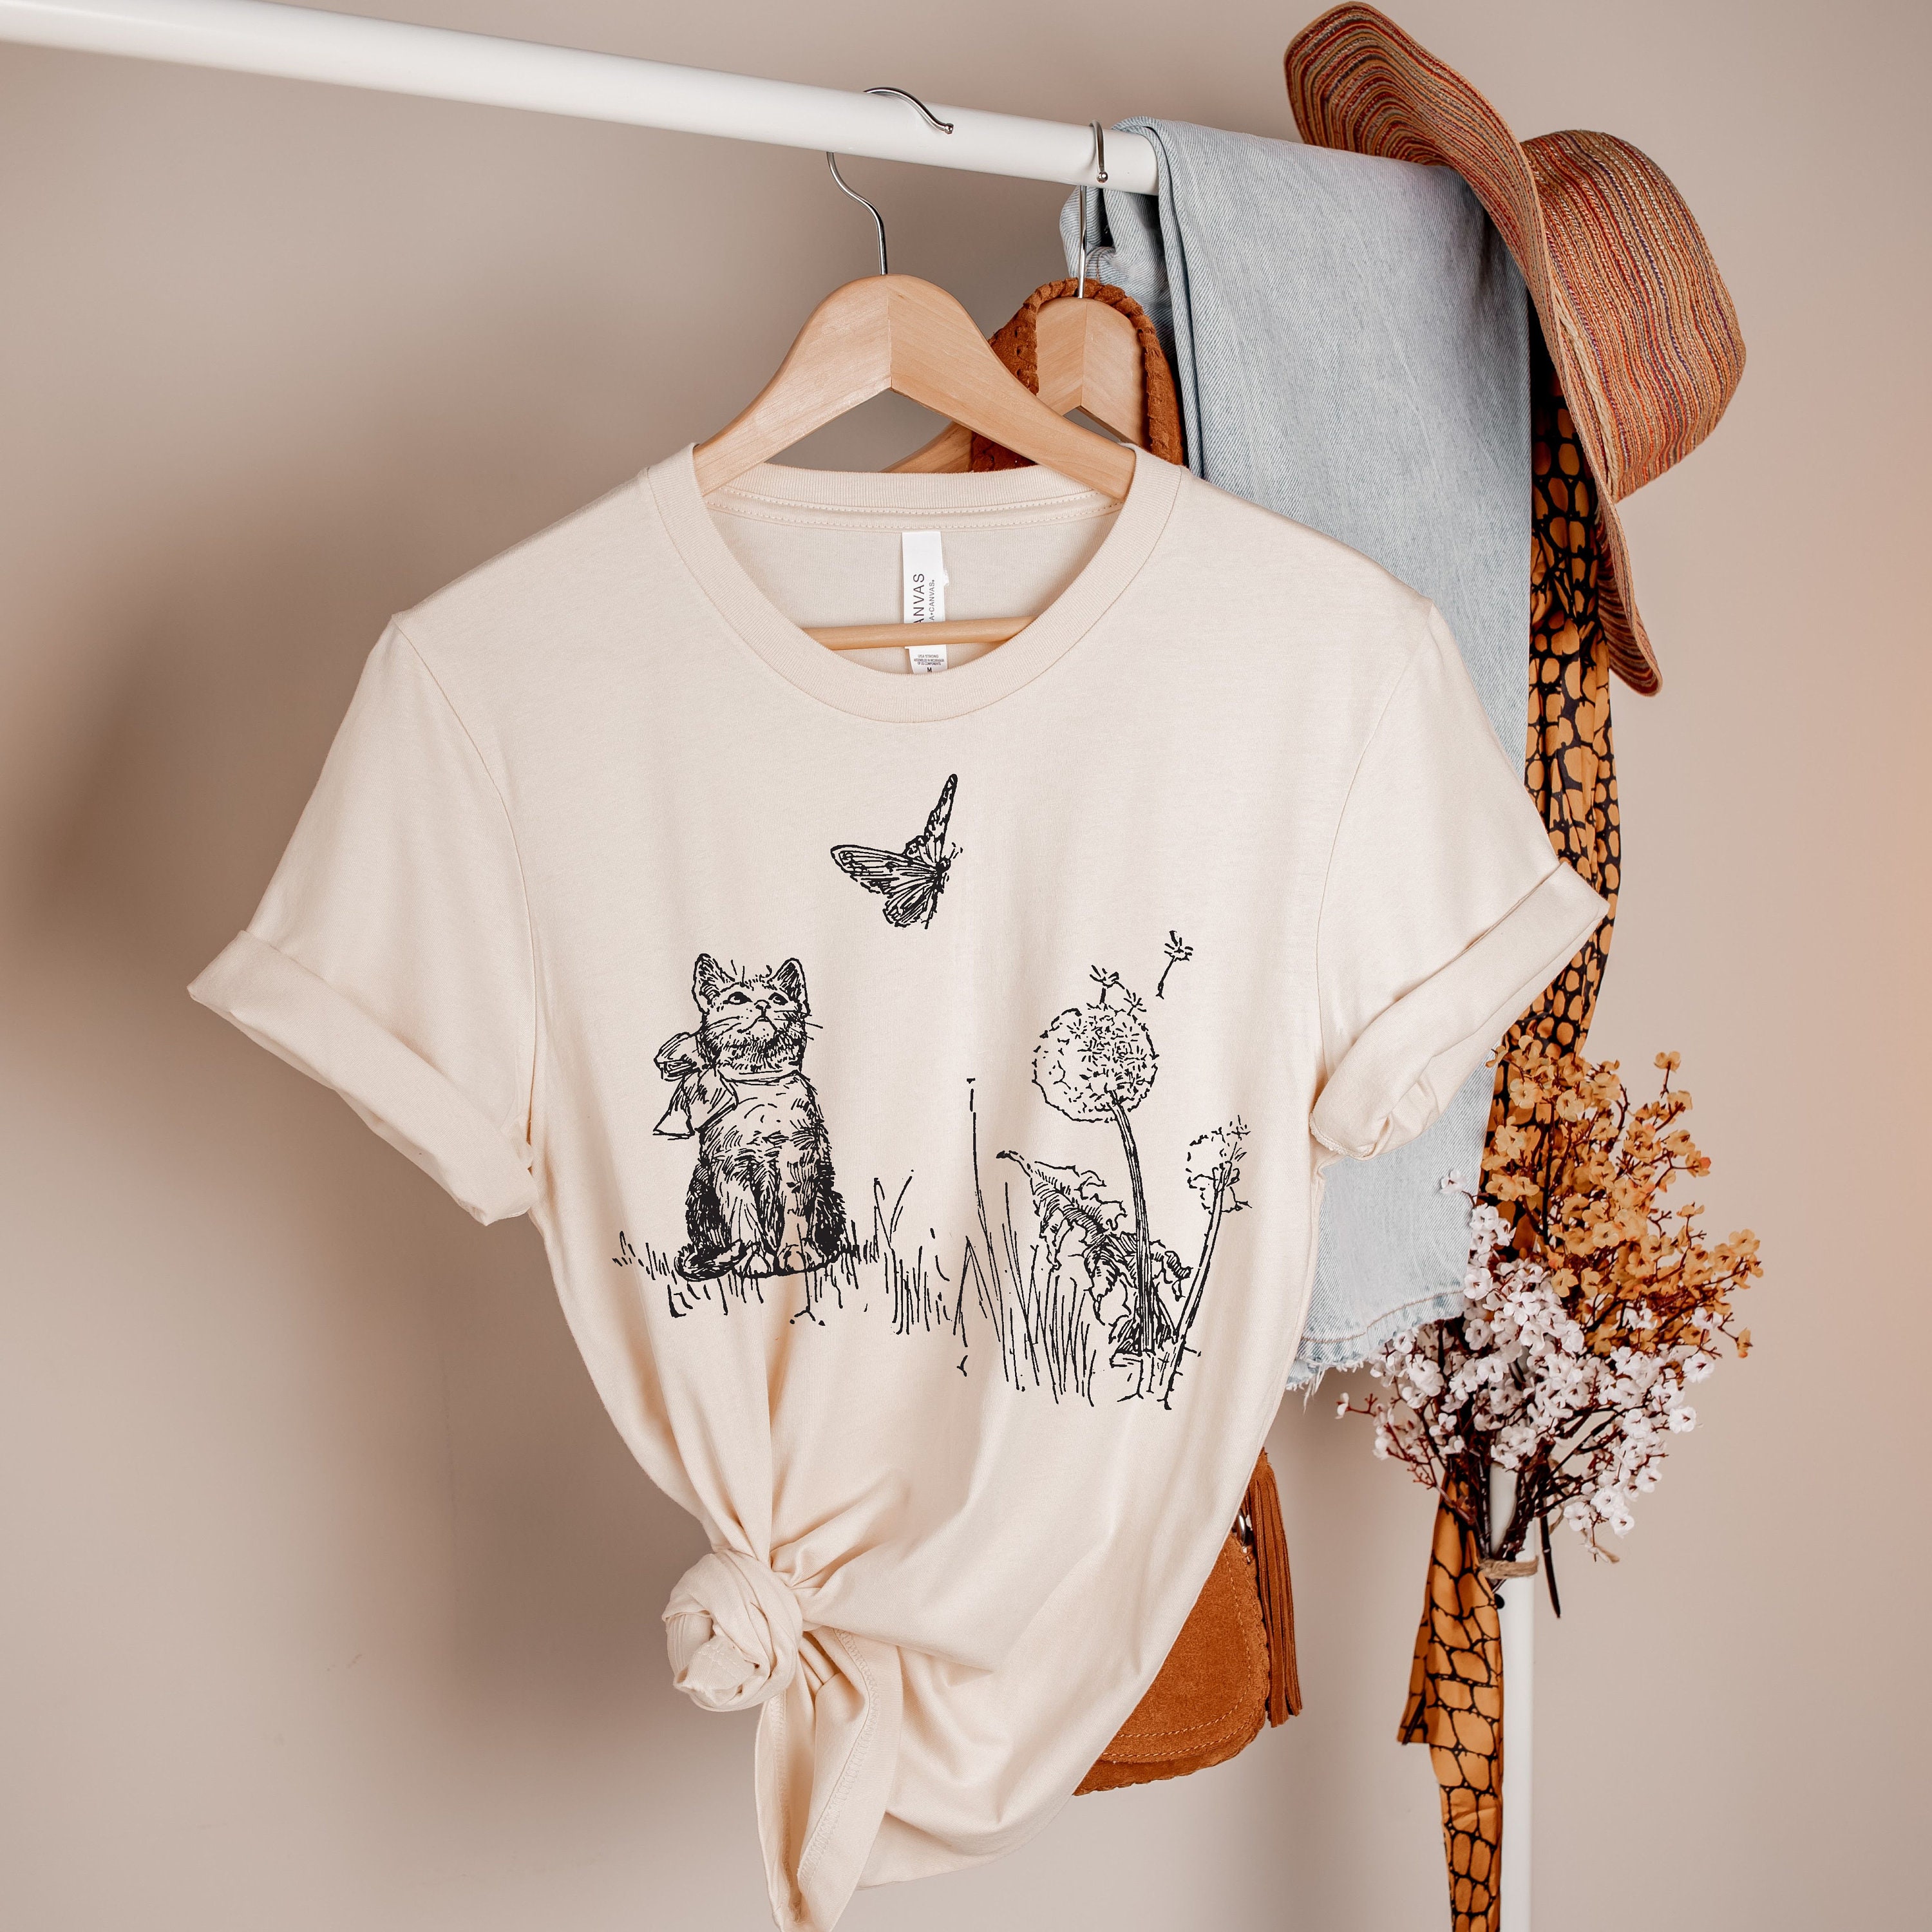 Vintage Kitten Butterfly Tshirt Floral Cat T shirt Botanical Cat Tee Cute Cat Graphic Tee Vintage Cat Shirt Cat Mom Gift for Her